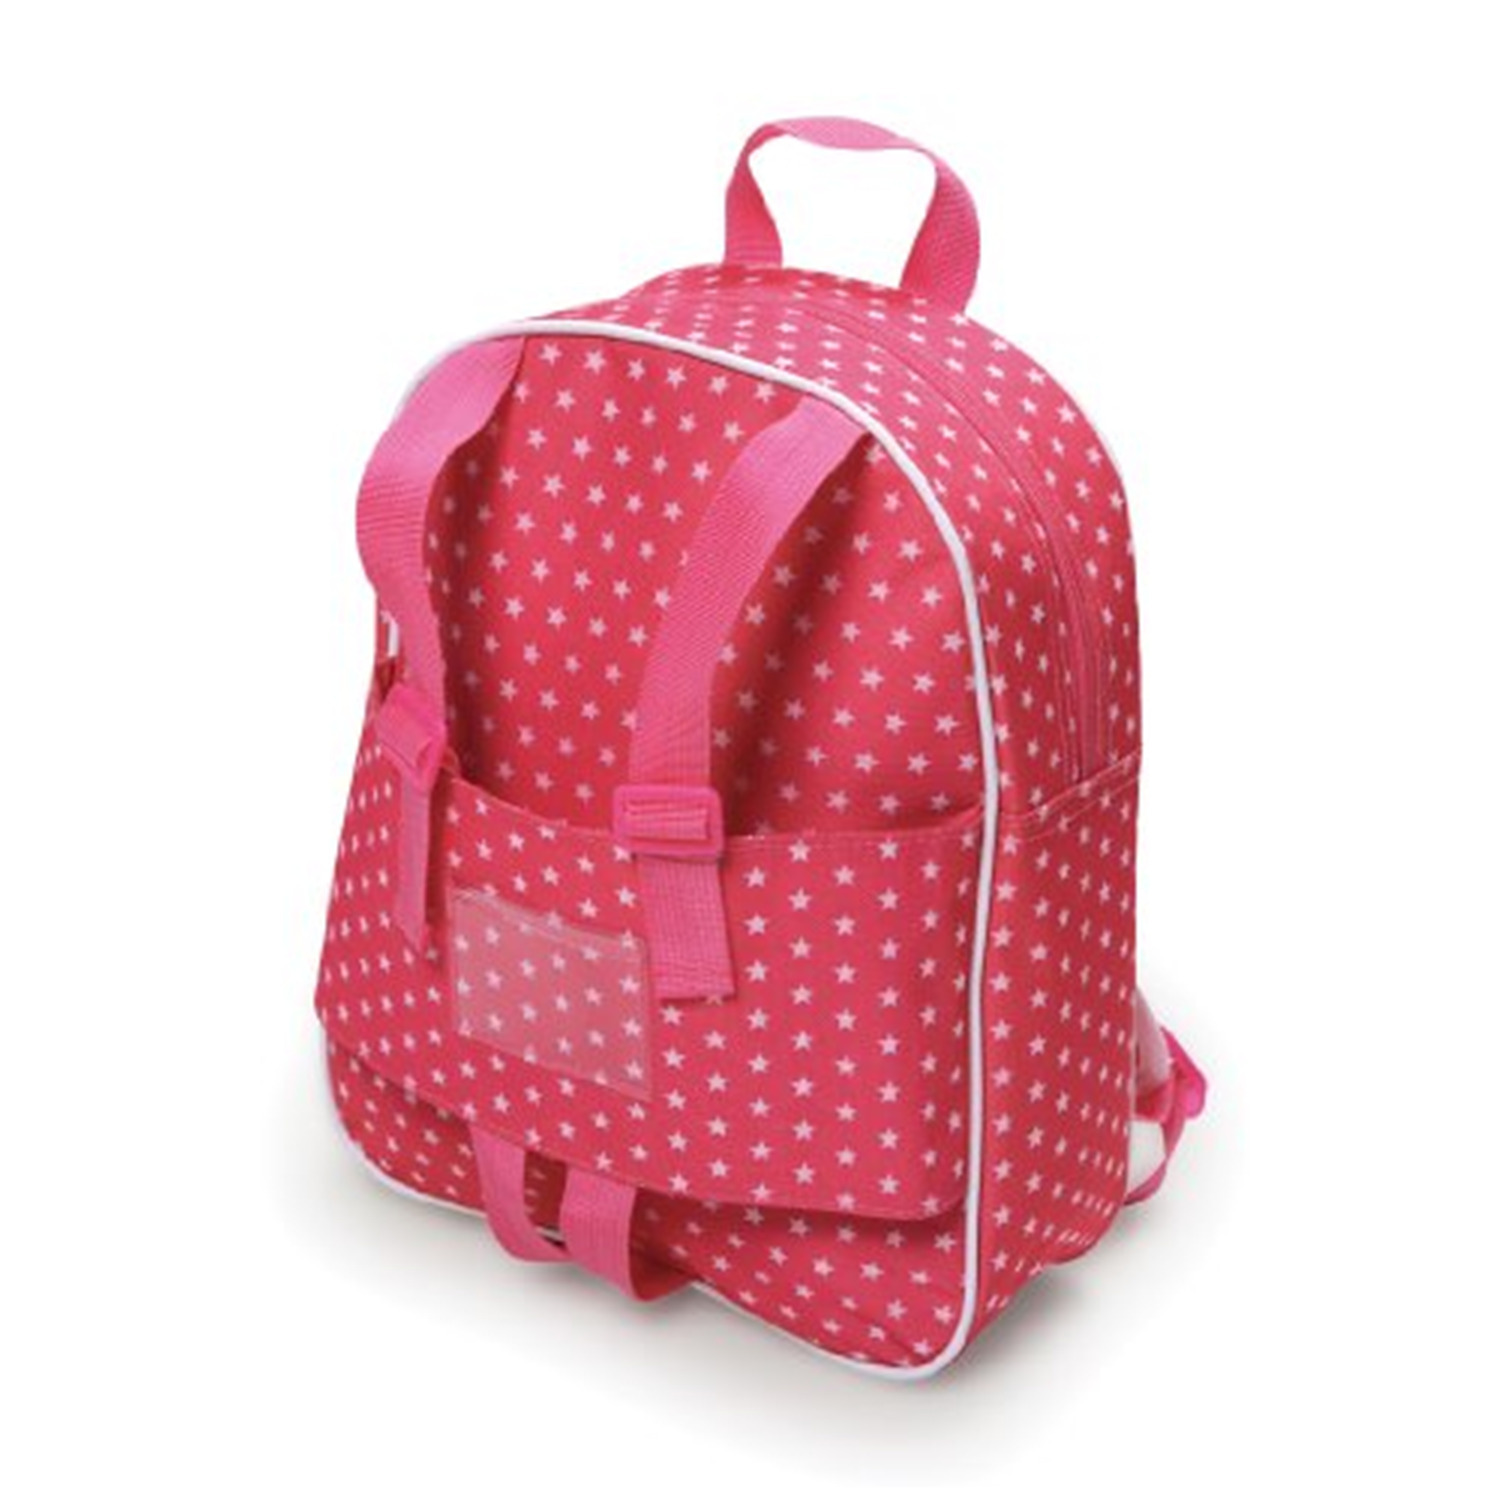 Badger Basket Doll Travel Backpack - Pink/Star - Fits American Girl, My Life As & Most 18 inch Dolls - image 1 of 6